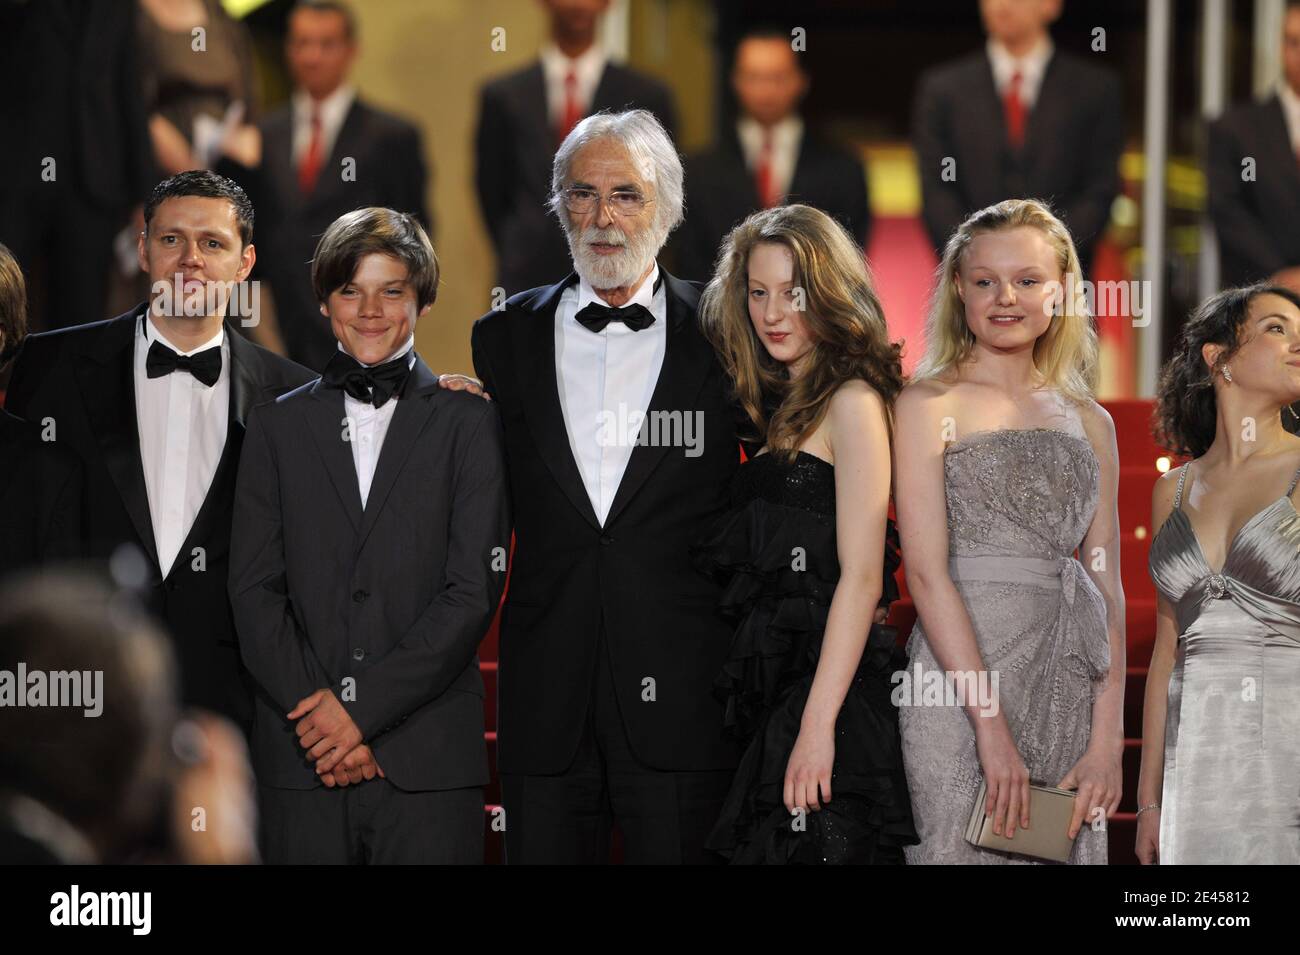 Director Michael Haneke, Leonie Benesch, Marie-Victoria Dragus, Janina Fautz, Roxanne Duran, Michal Kranz, Leonard Proxauf and Enno Trebbs arriving for the screening of 'The White Ribbon' during the 62nd Cannes Film Festival at the Palais des Festivals in Cannes, France on May 21, 2009. Photo by Nebinger-Orban/ABACAPRESS.COM Stock Photo